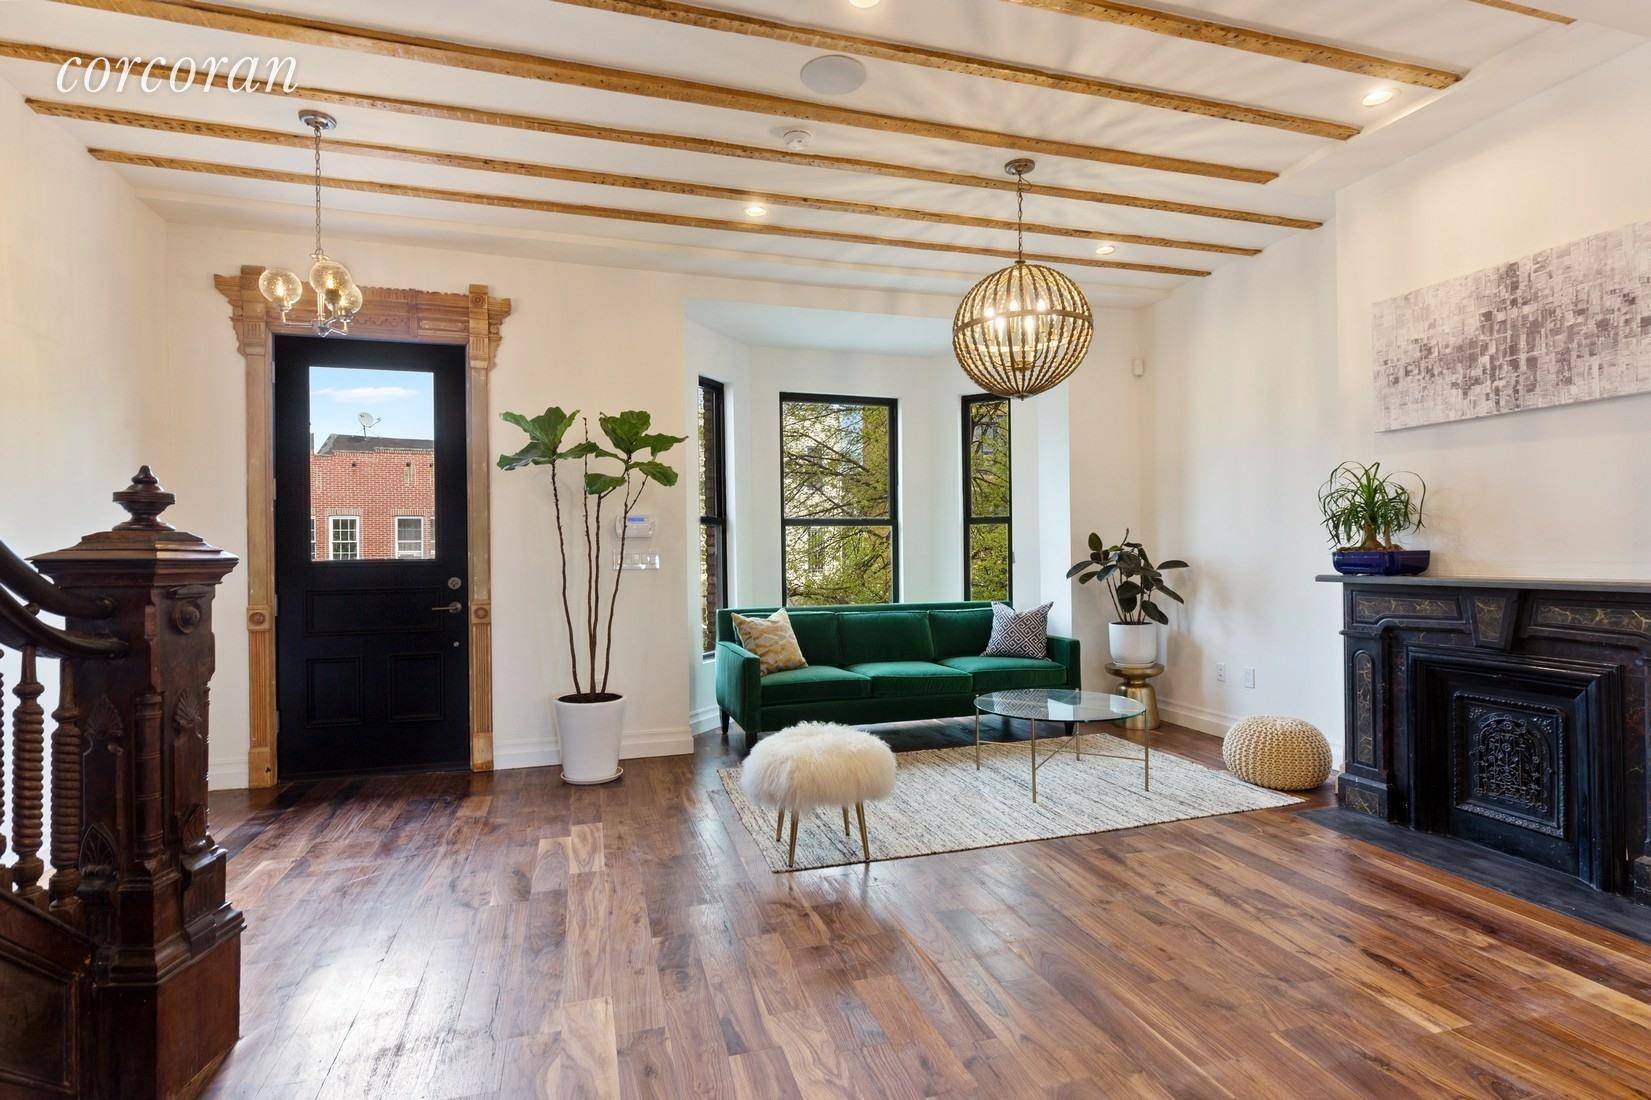 Make your new home at 44 Rochester Avenue, a gut renovated 2 family townhouse on the sought after Stuyvesant Heights and Crown Heights border.